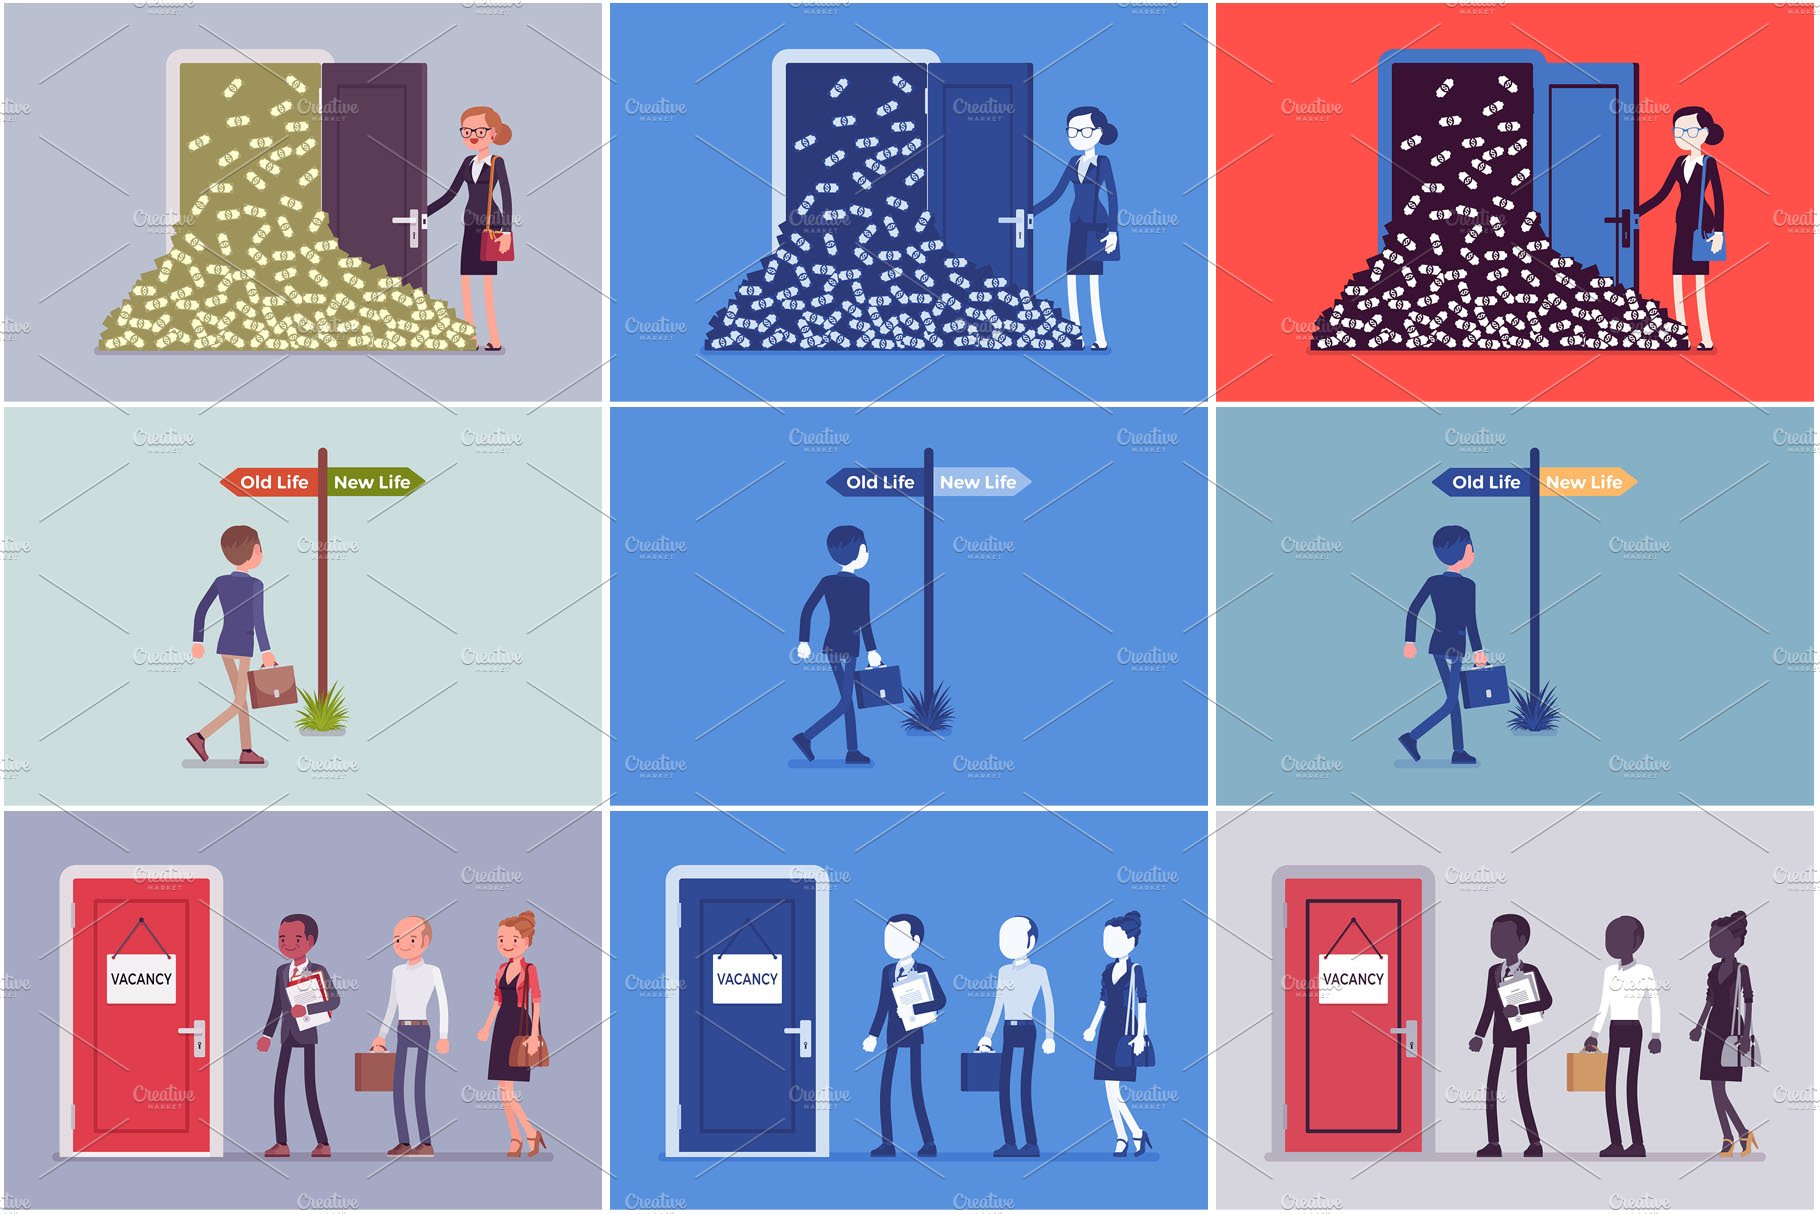 A series of illustrations of people standing in front of a door.